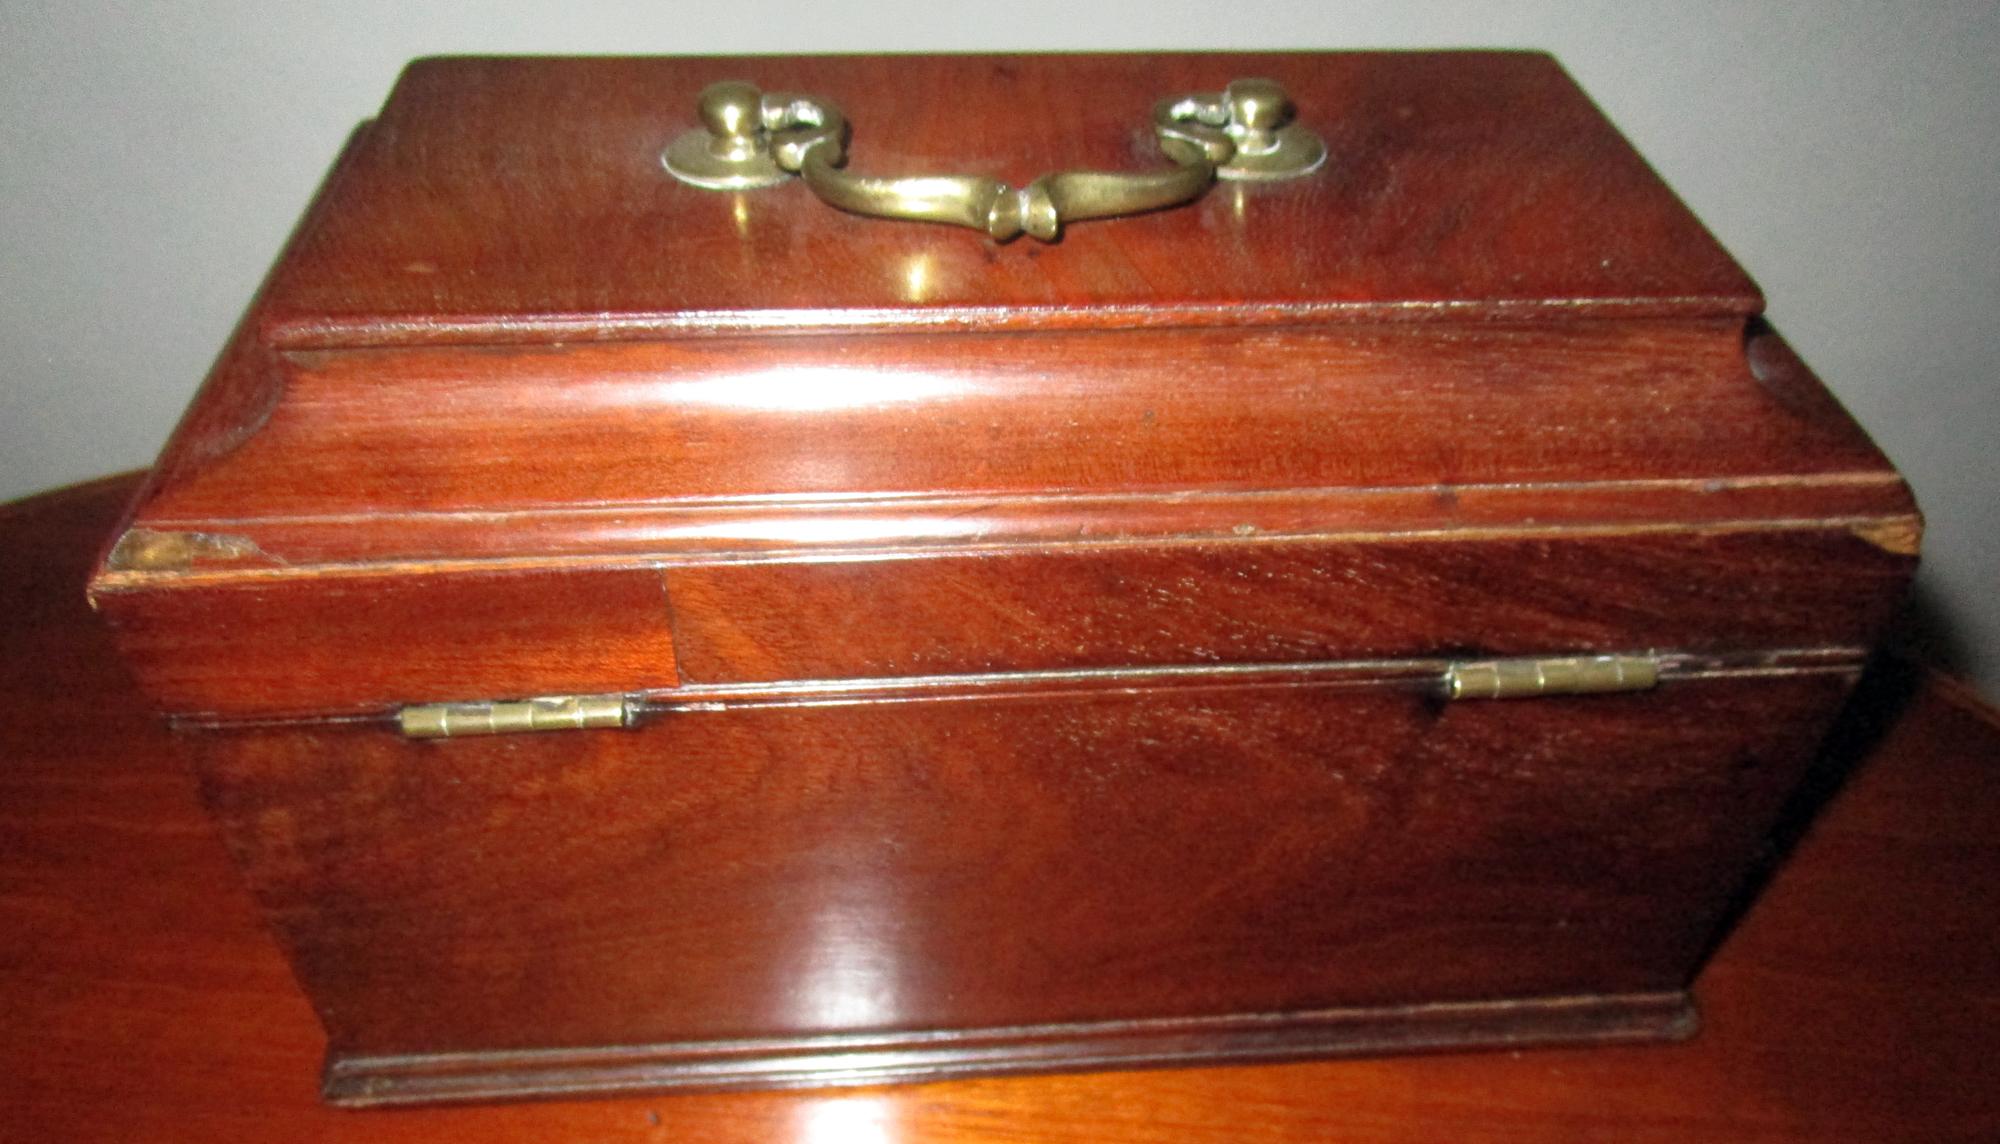 English Chippendale style mahogany box lined with red velvet. Features include original brass escutcheon and top handle. Probably once a tea caddy with lidded interior. Nice old patina. Handsome box for decorative and storage purposes, no tea boxes